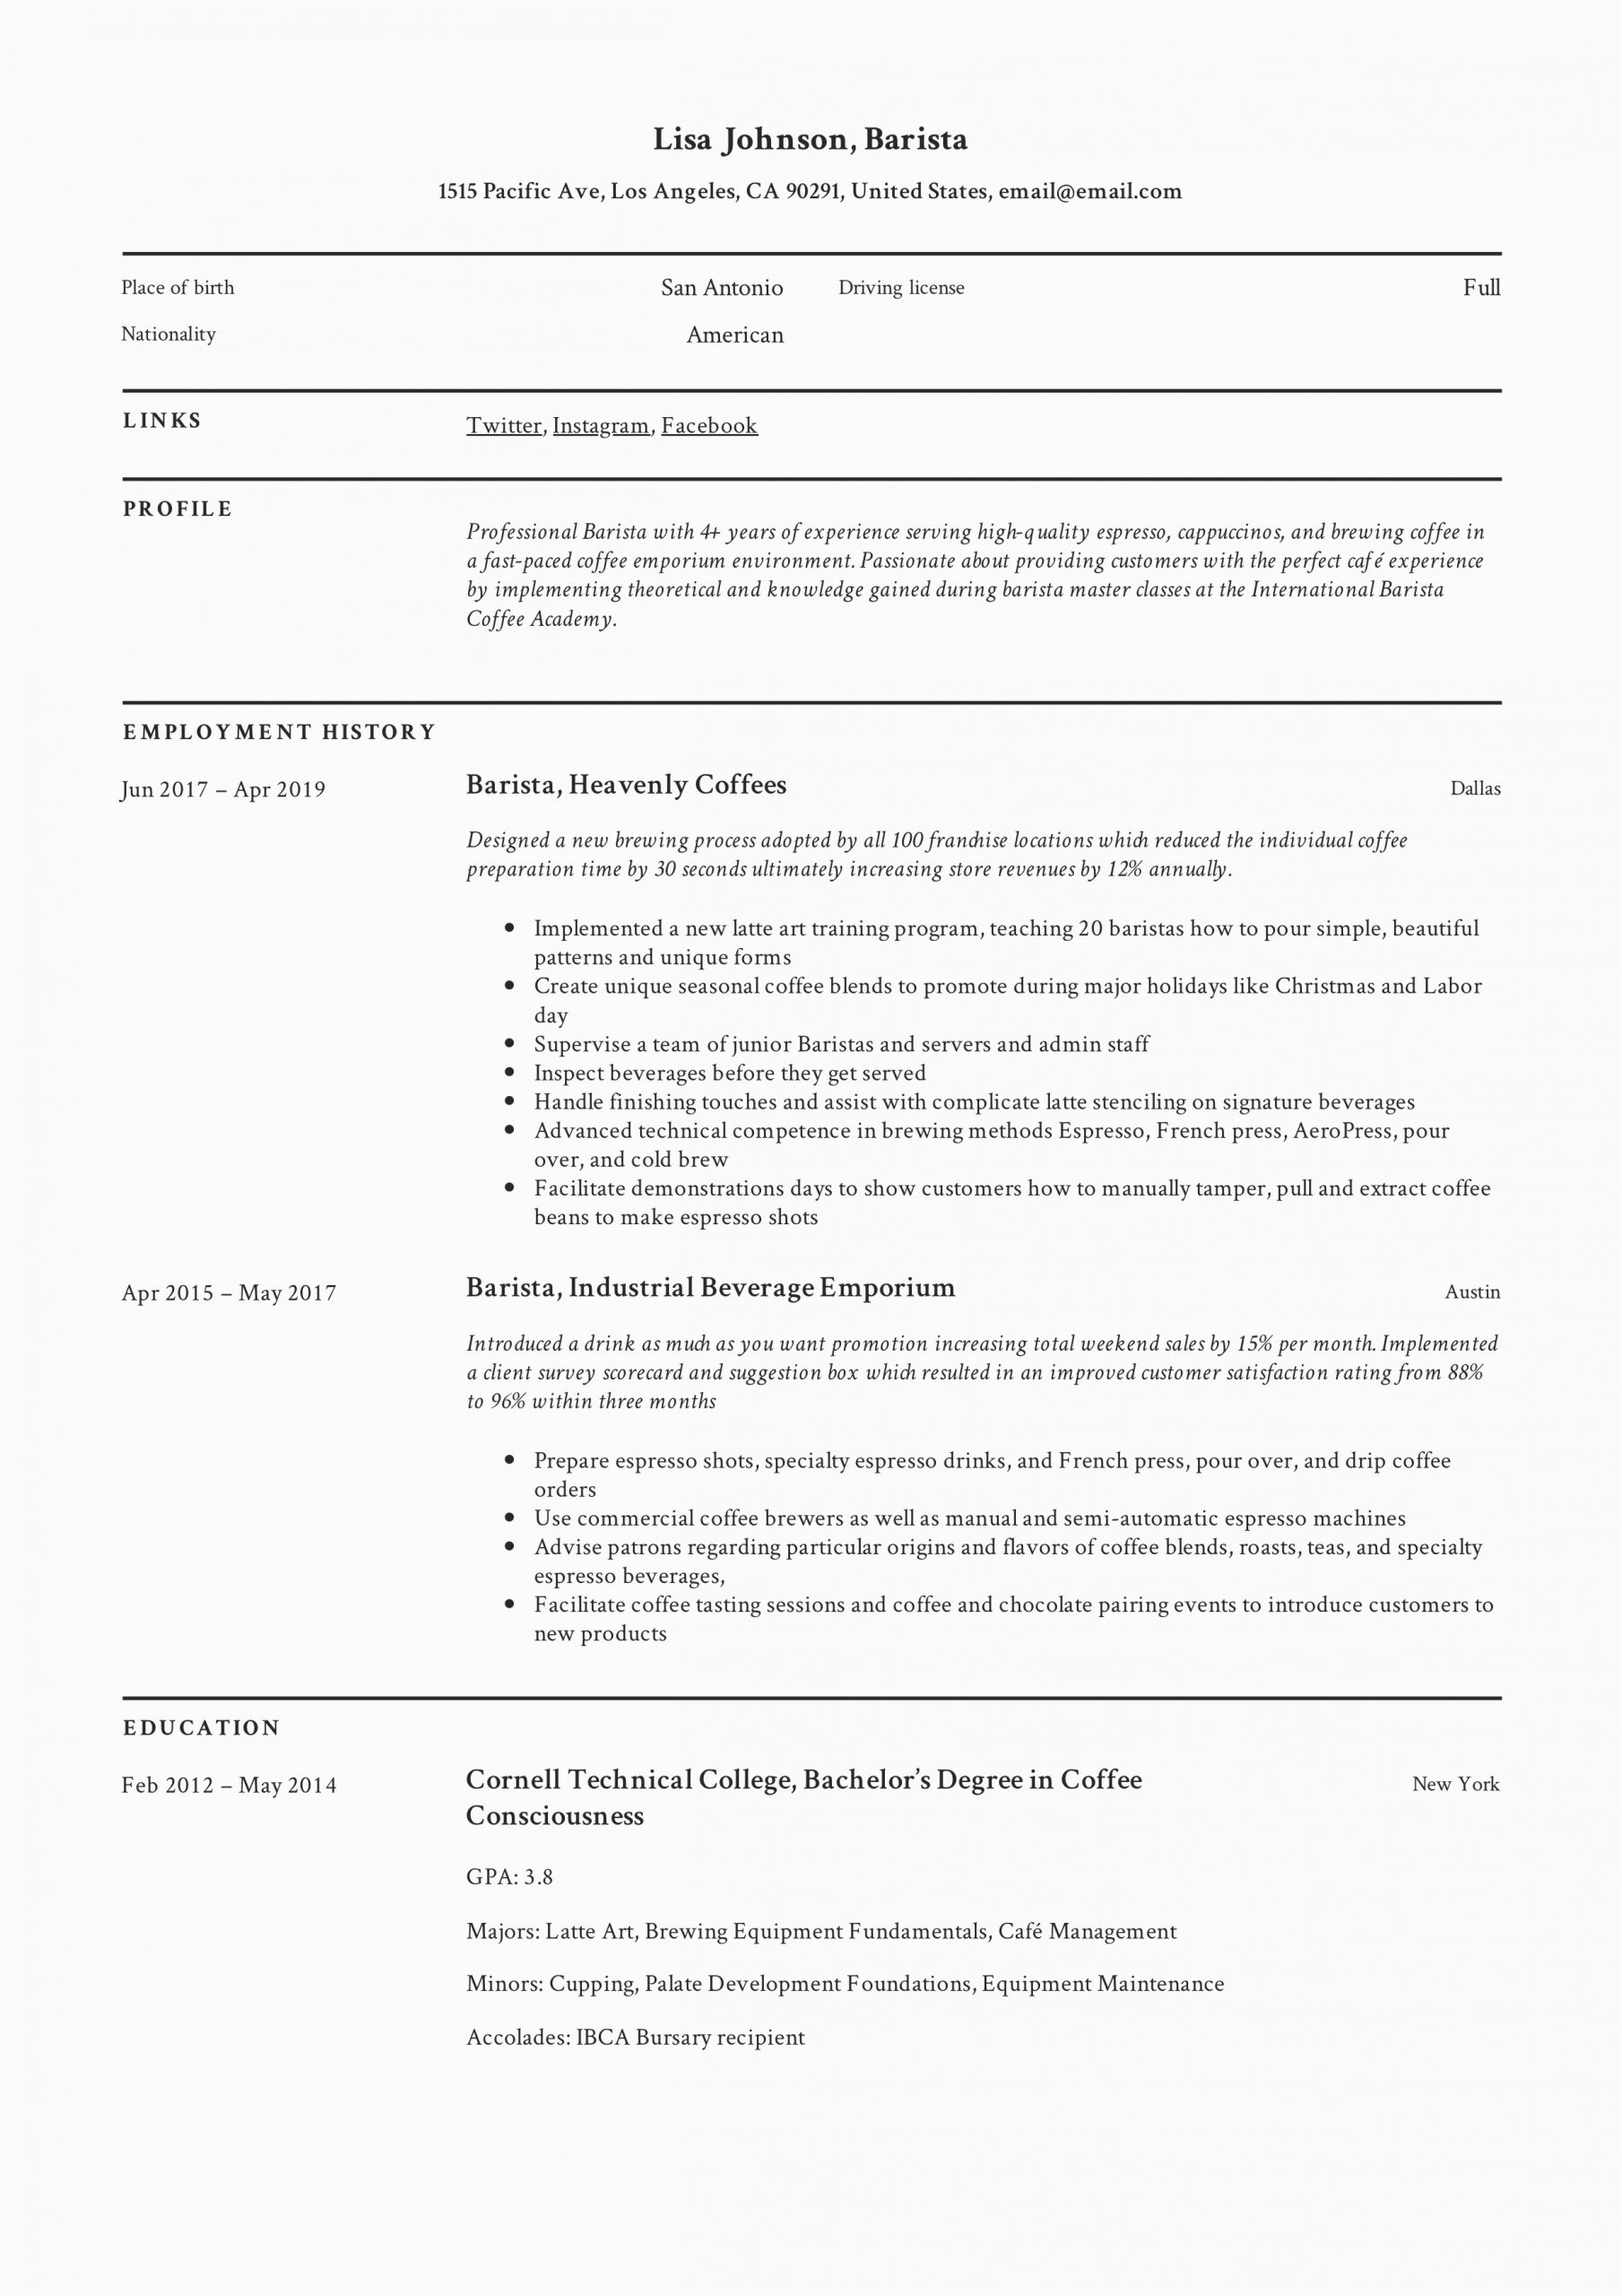 Sample Resume for Barista Position with No Experience Barista Resume & Writing Guide 12 Resume Templates